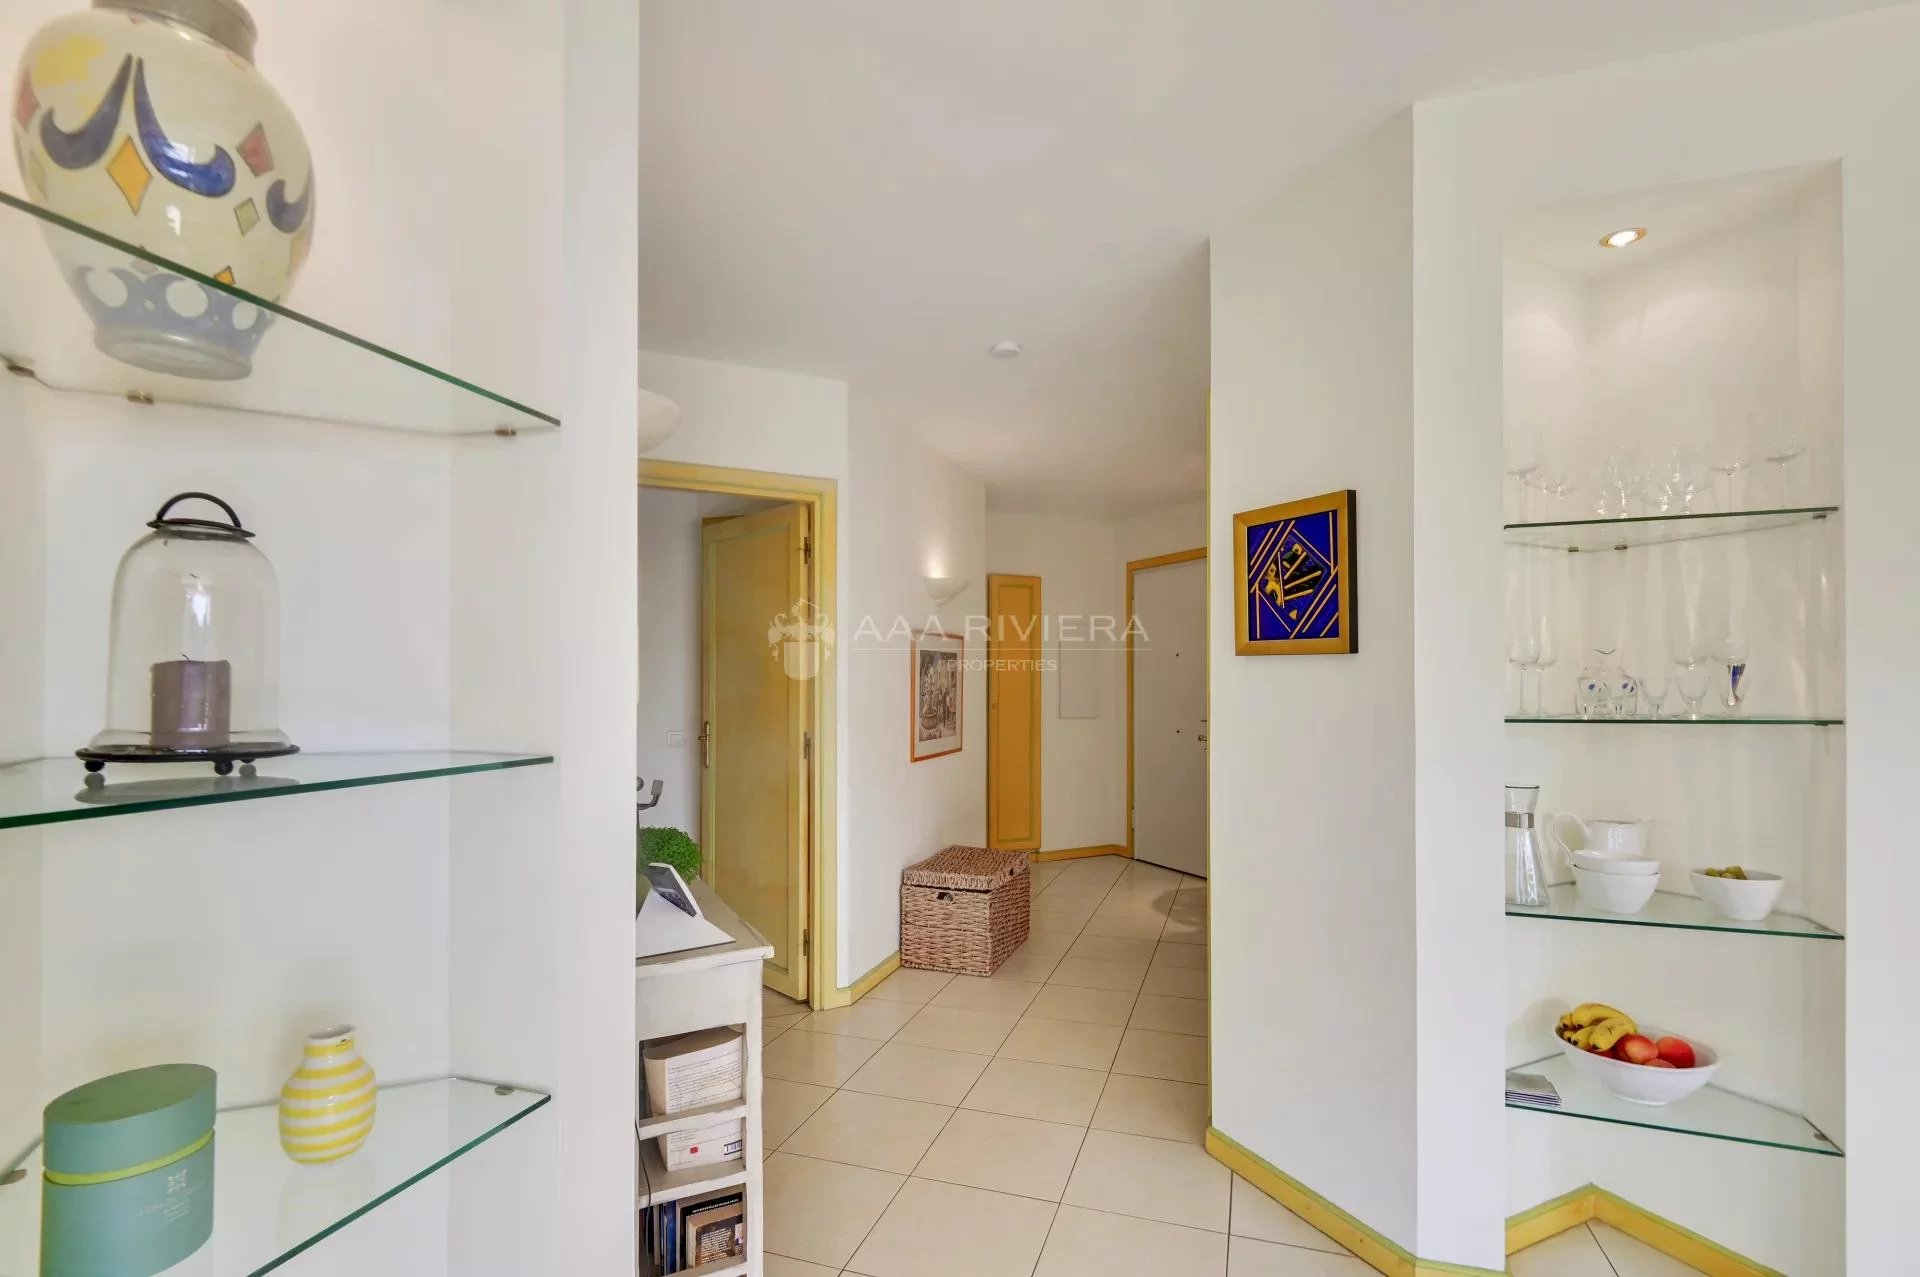 SOLD - Close to Mougins village with all the shops at your doorstep set in green surroundings